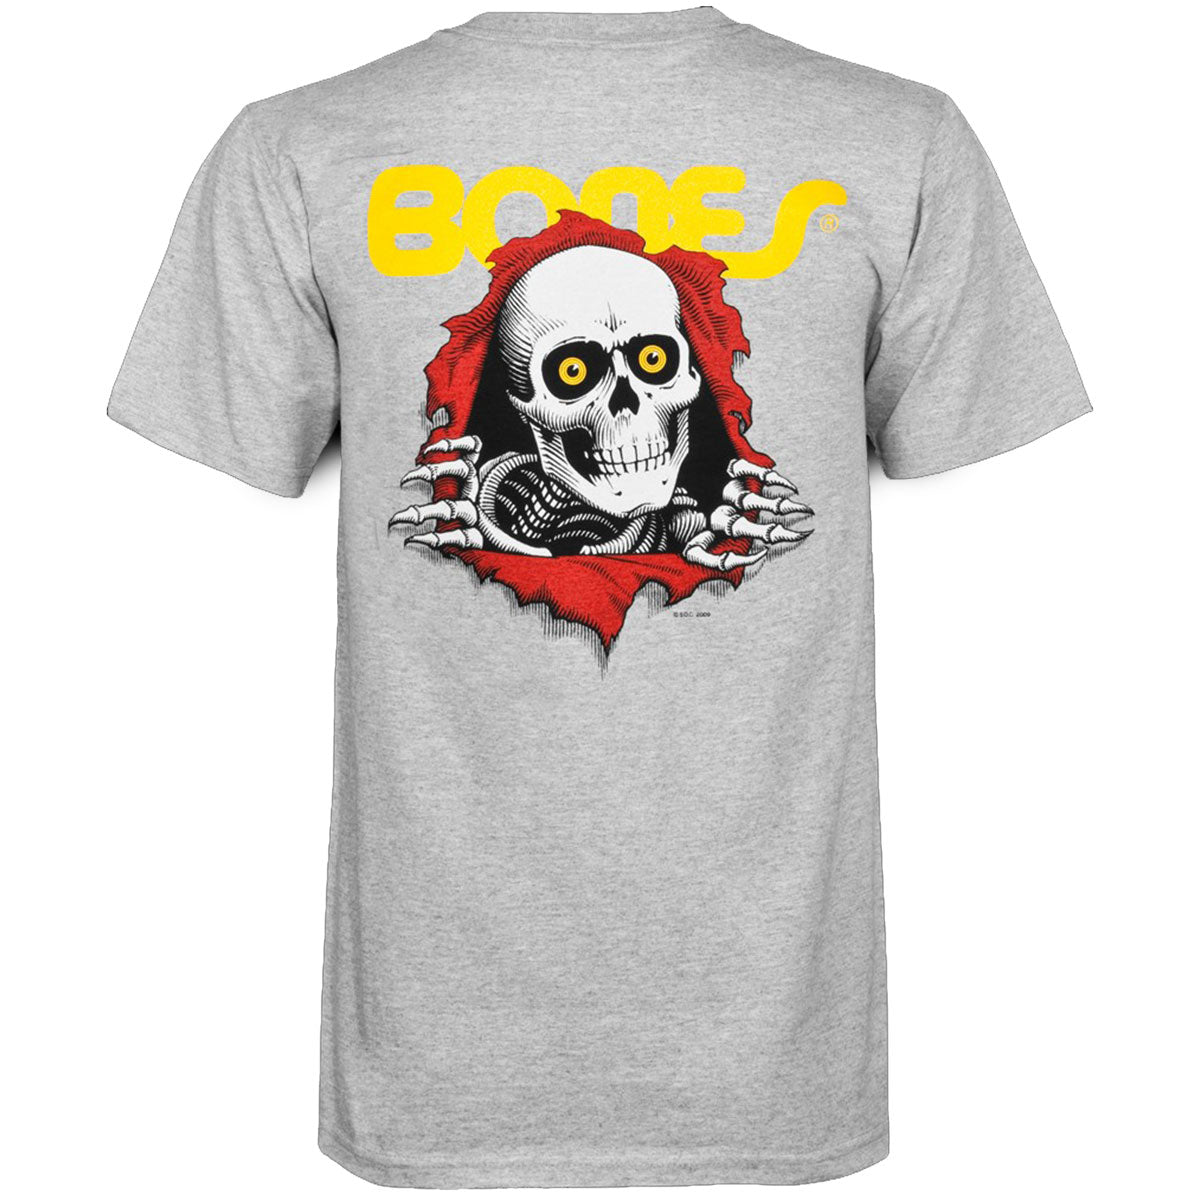 Powell-Peralta Ripper T-Shirt-Gray-MD image 1